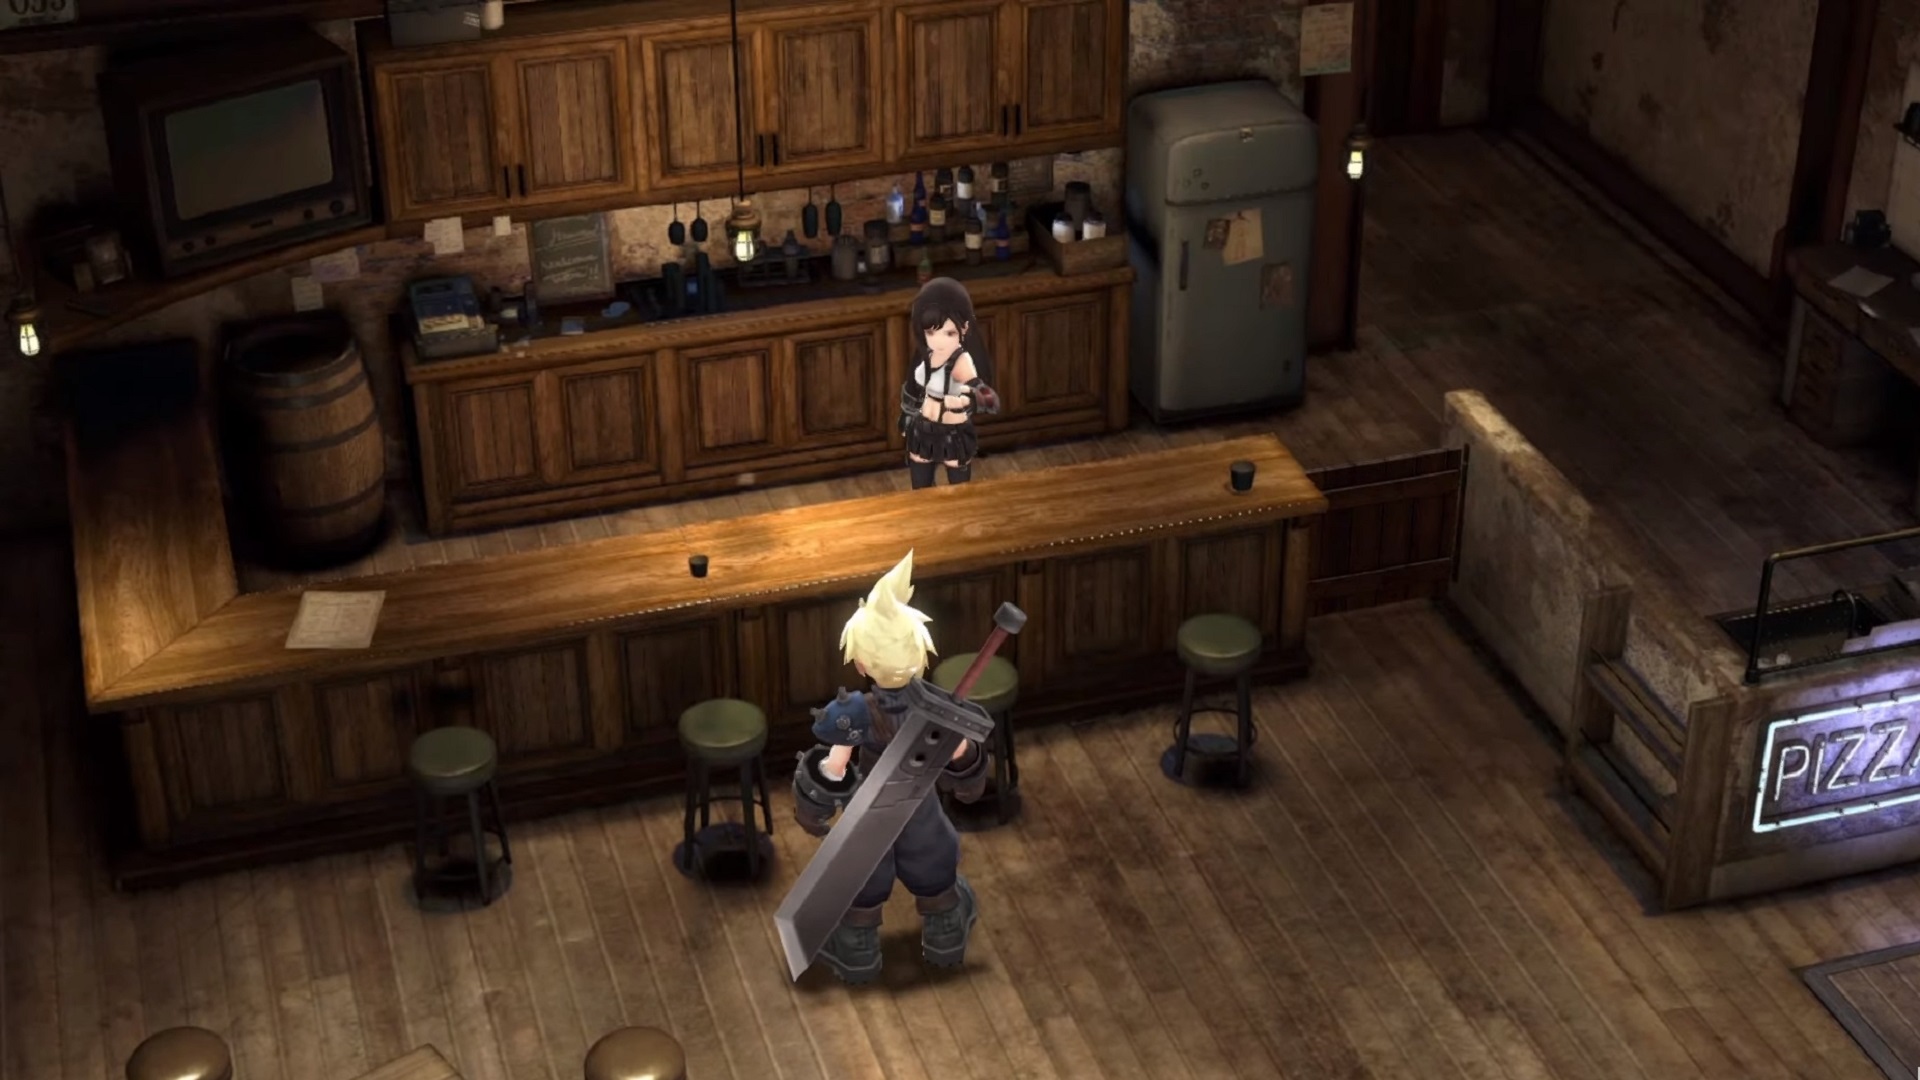 Another Final Fantasy 7 game coming to mobile, will appear this September - Photo 3.